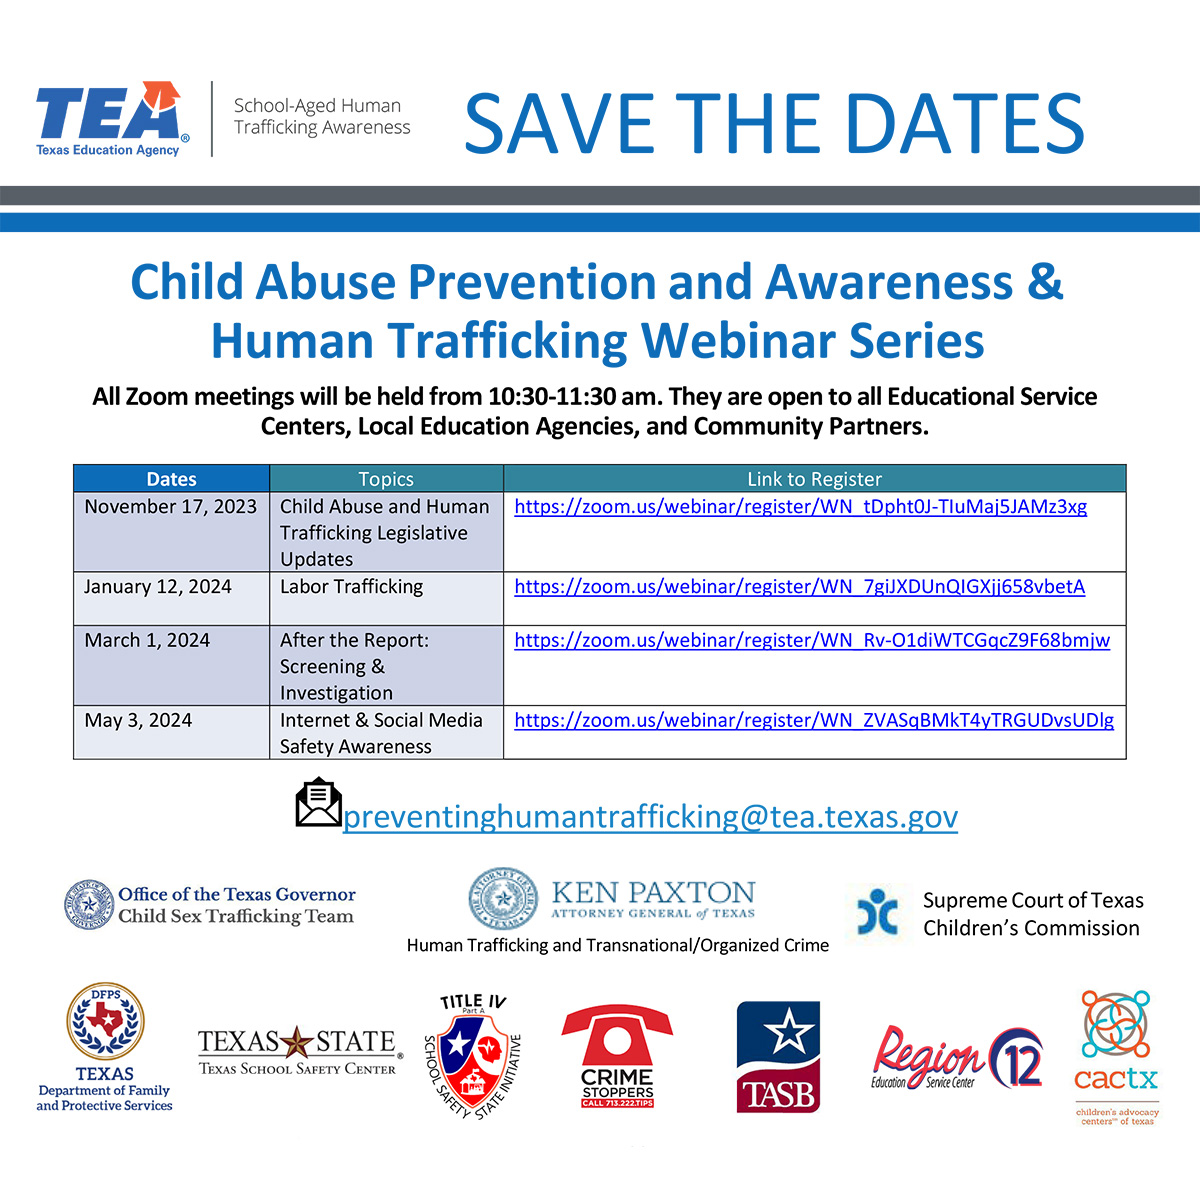 The next webinar in the Texas Education Agency's Child Abuse Prevention & Human Trafficking Webinar Series is this Friday, May 3. The topic for May is Internet and Social Media Awareness. Visit ow.ly/jl2f50Rlkym to register! #SchoolSafety